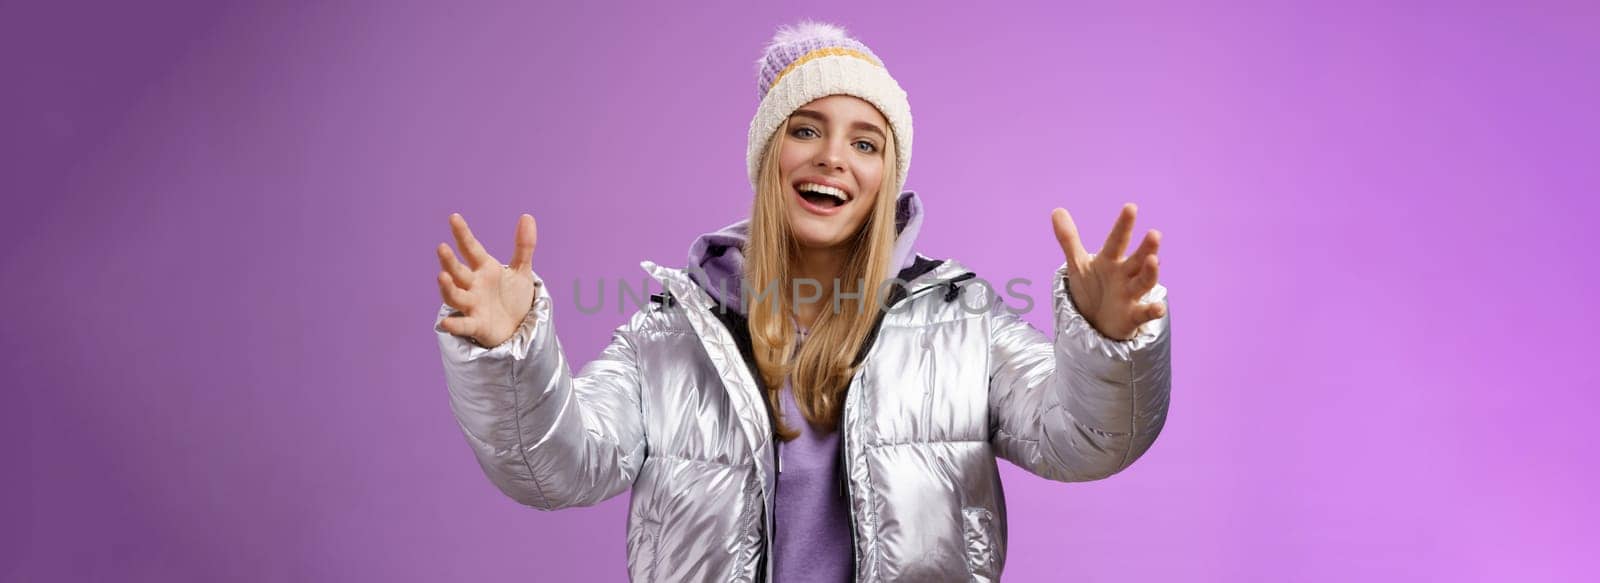 Charming carefree gorgeous blond european girl holding big thing explaining shape box extend arms reaching camera wanna hold friend tight cuddle embrace smiling friendly satisfied, purple background.